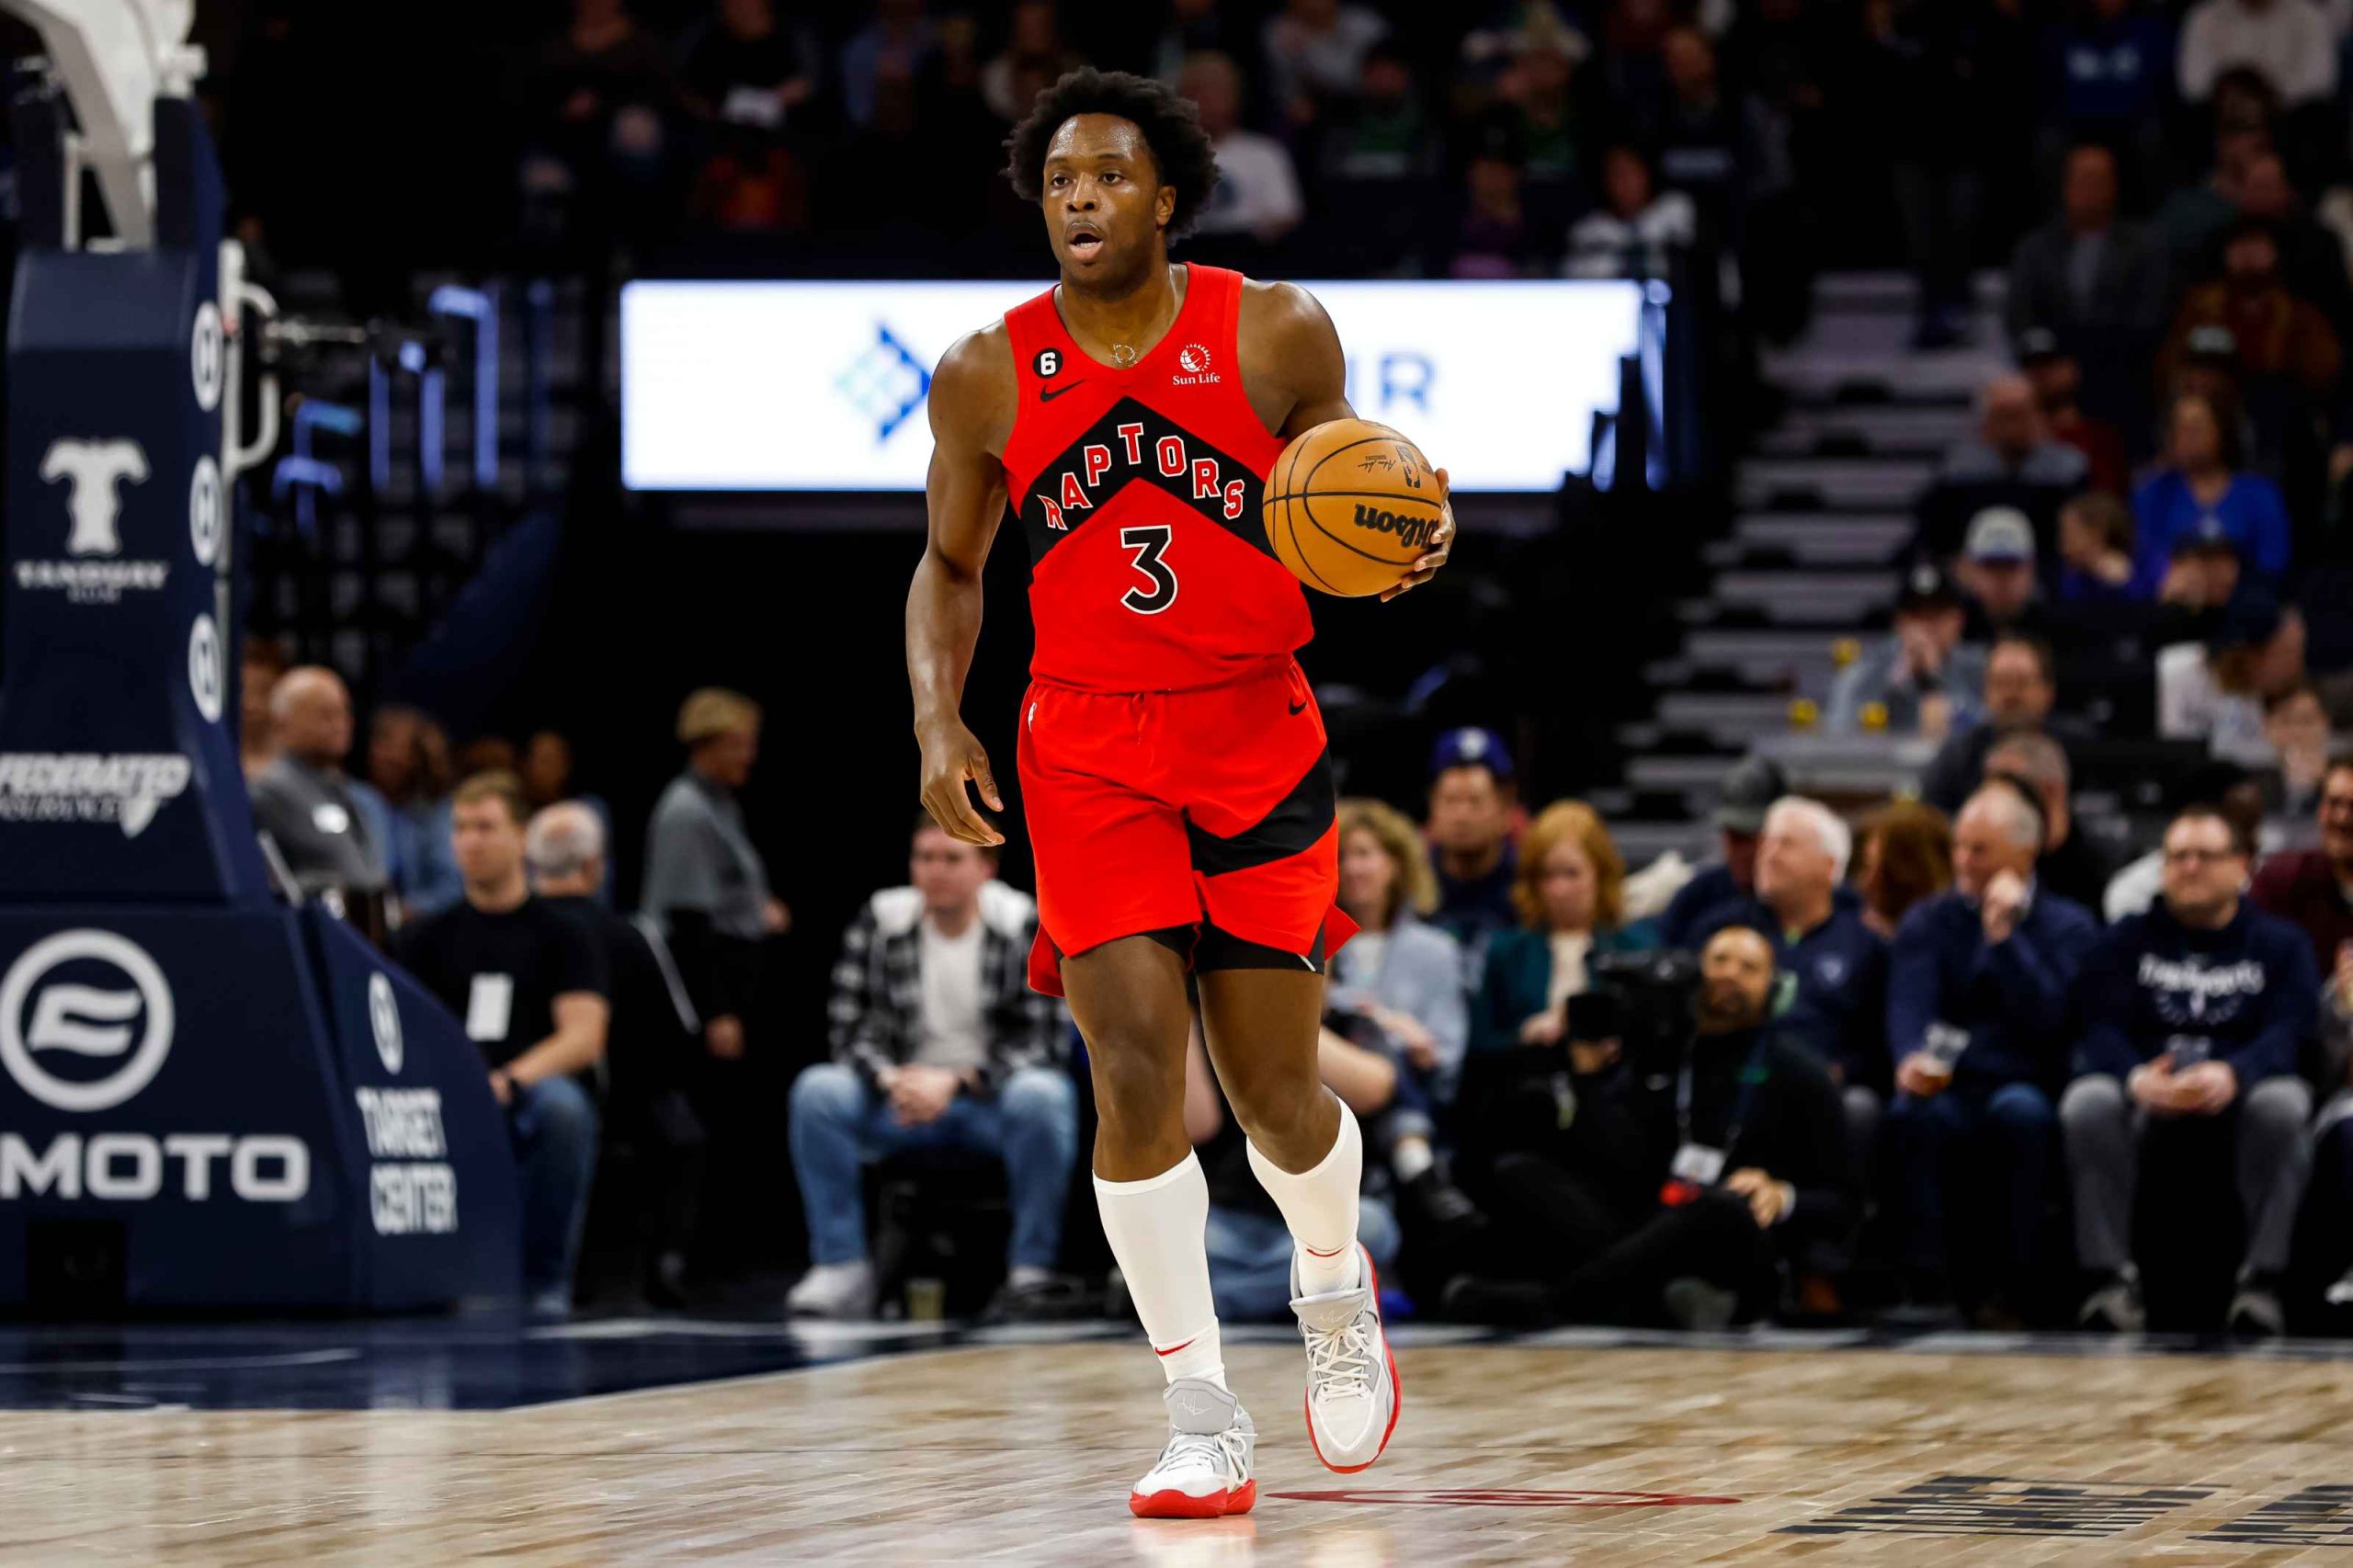 Hawks to Acquire OG Anunoby from the Raptors in a Fresh Trade Proposal